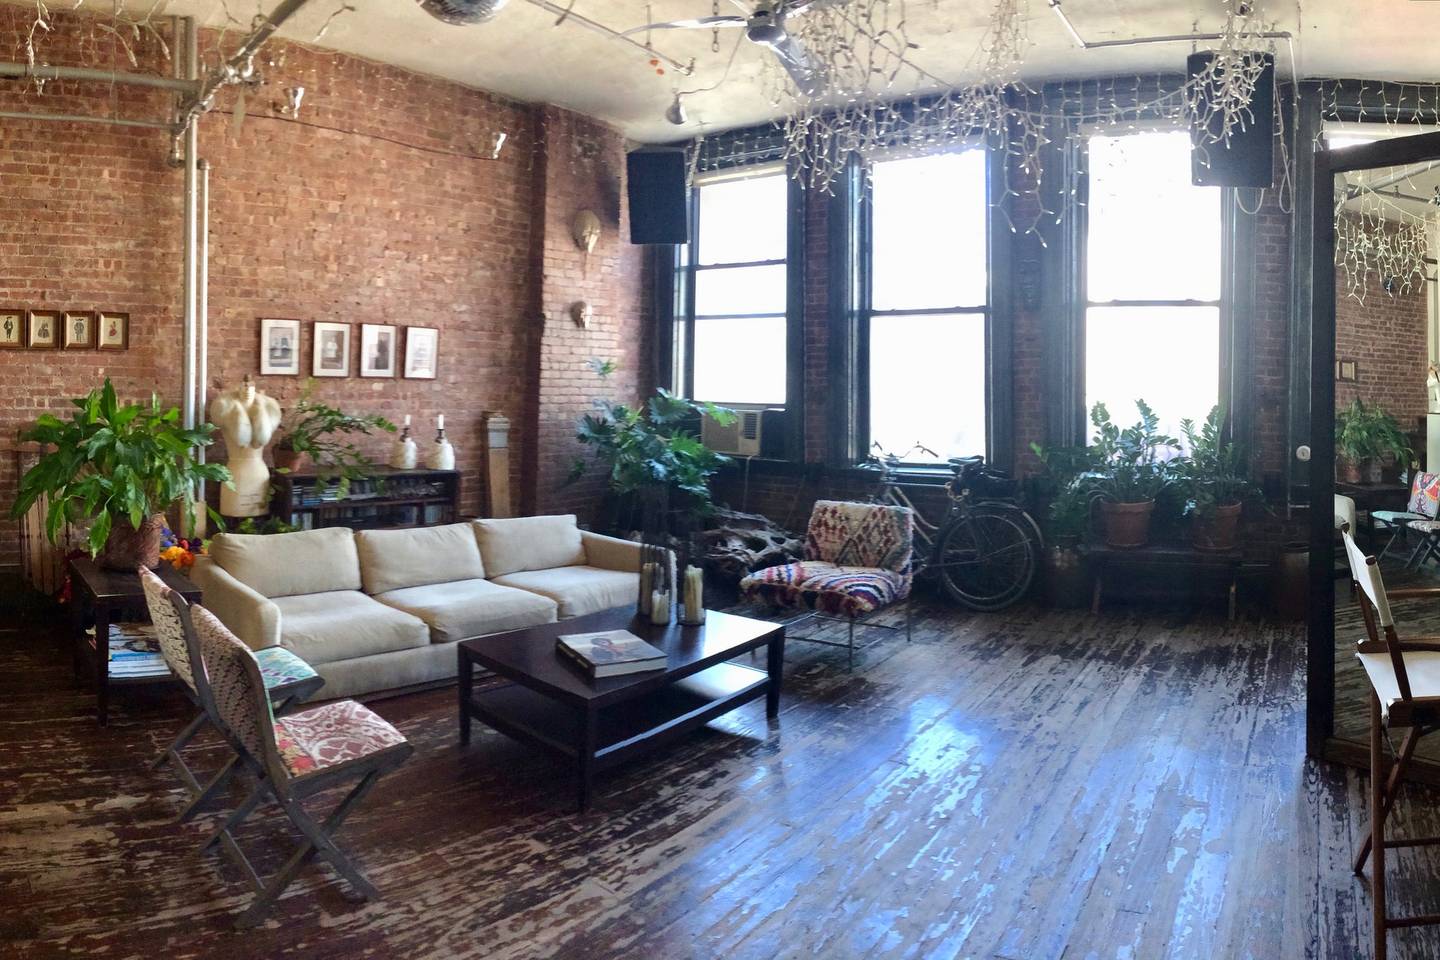 airbnb loft in bowery area new york city